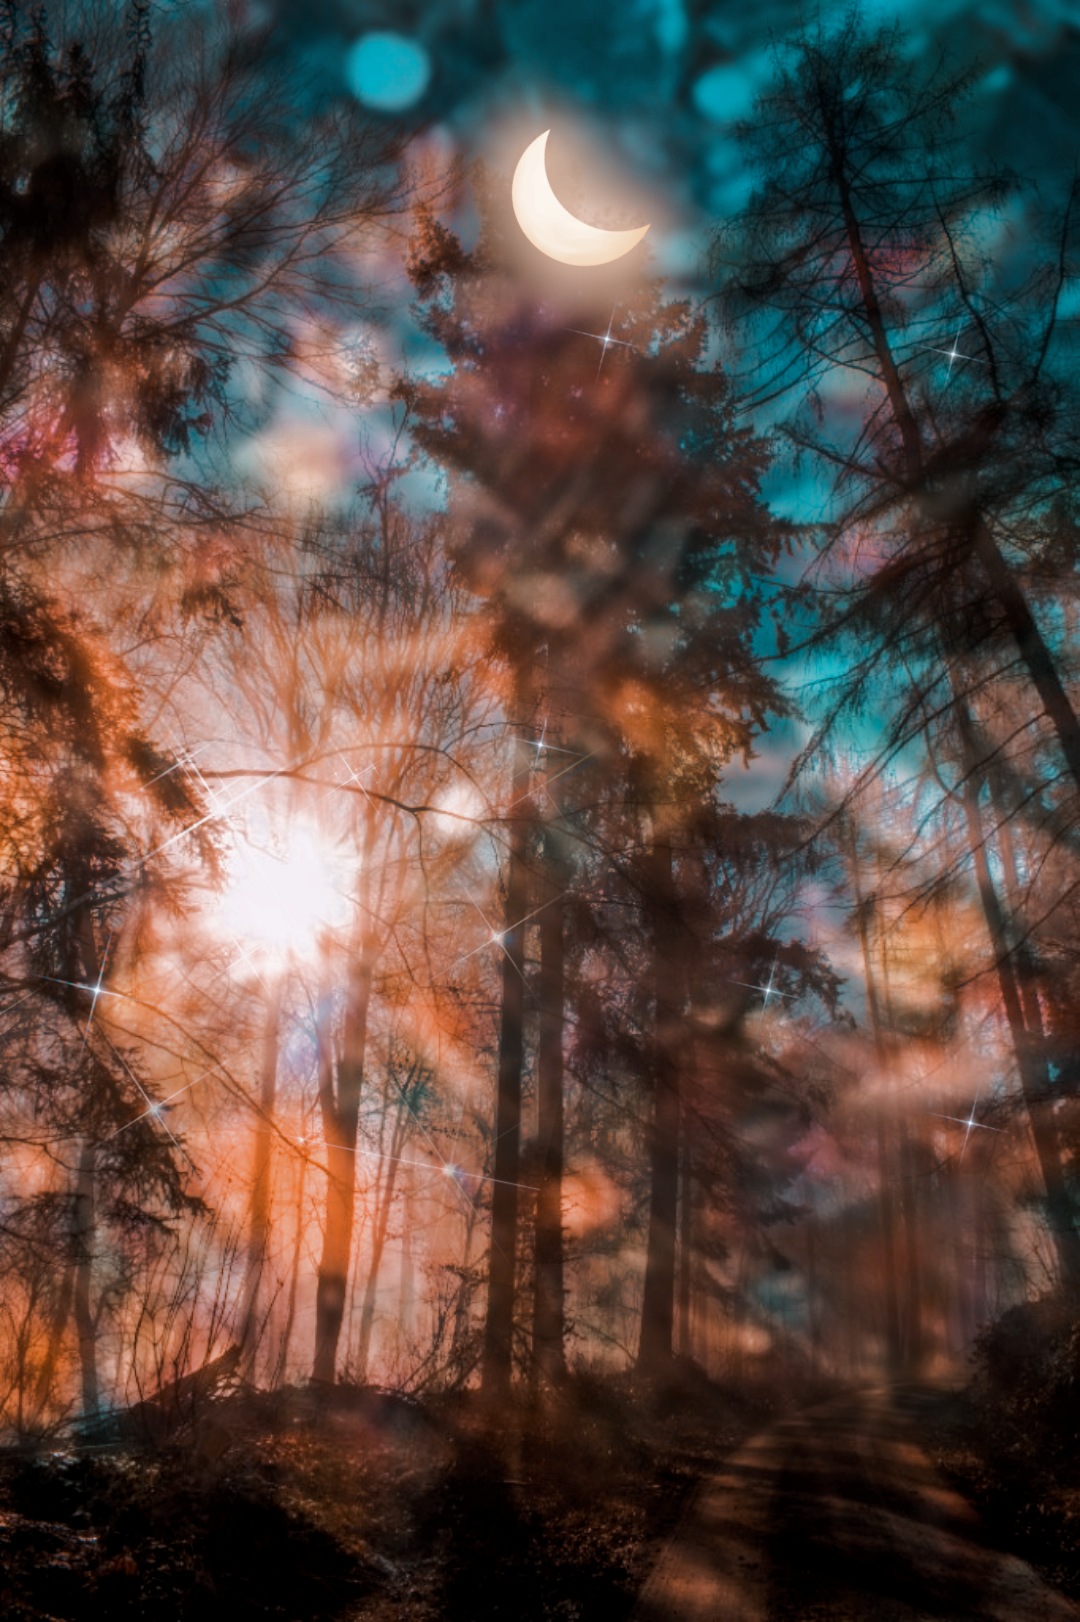 #madewithpicsart #background #backgrounds #walpapper #forest #moon #makeawesome